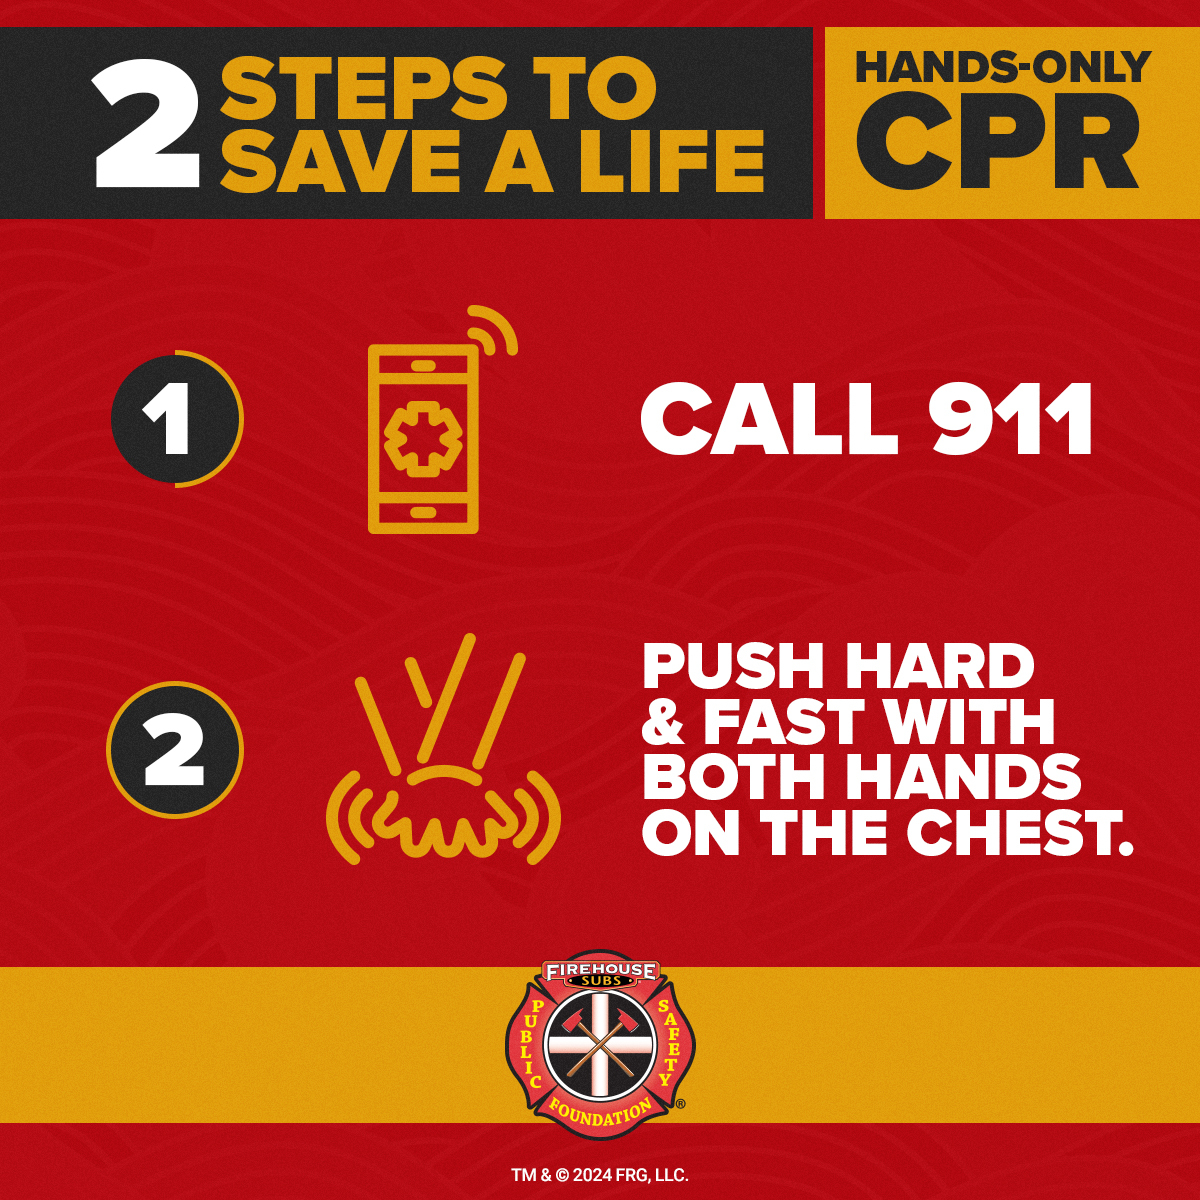 2 Steps to Save a Life